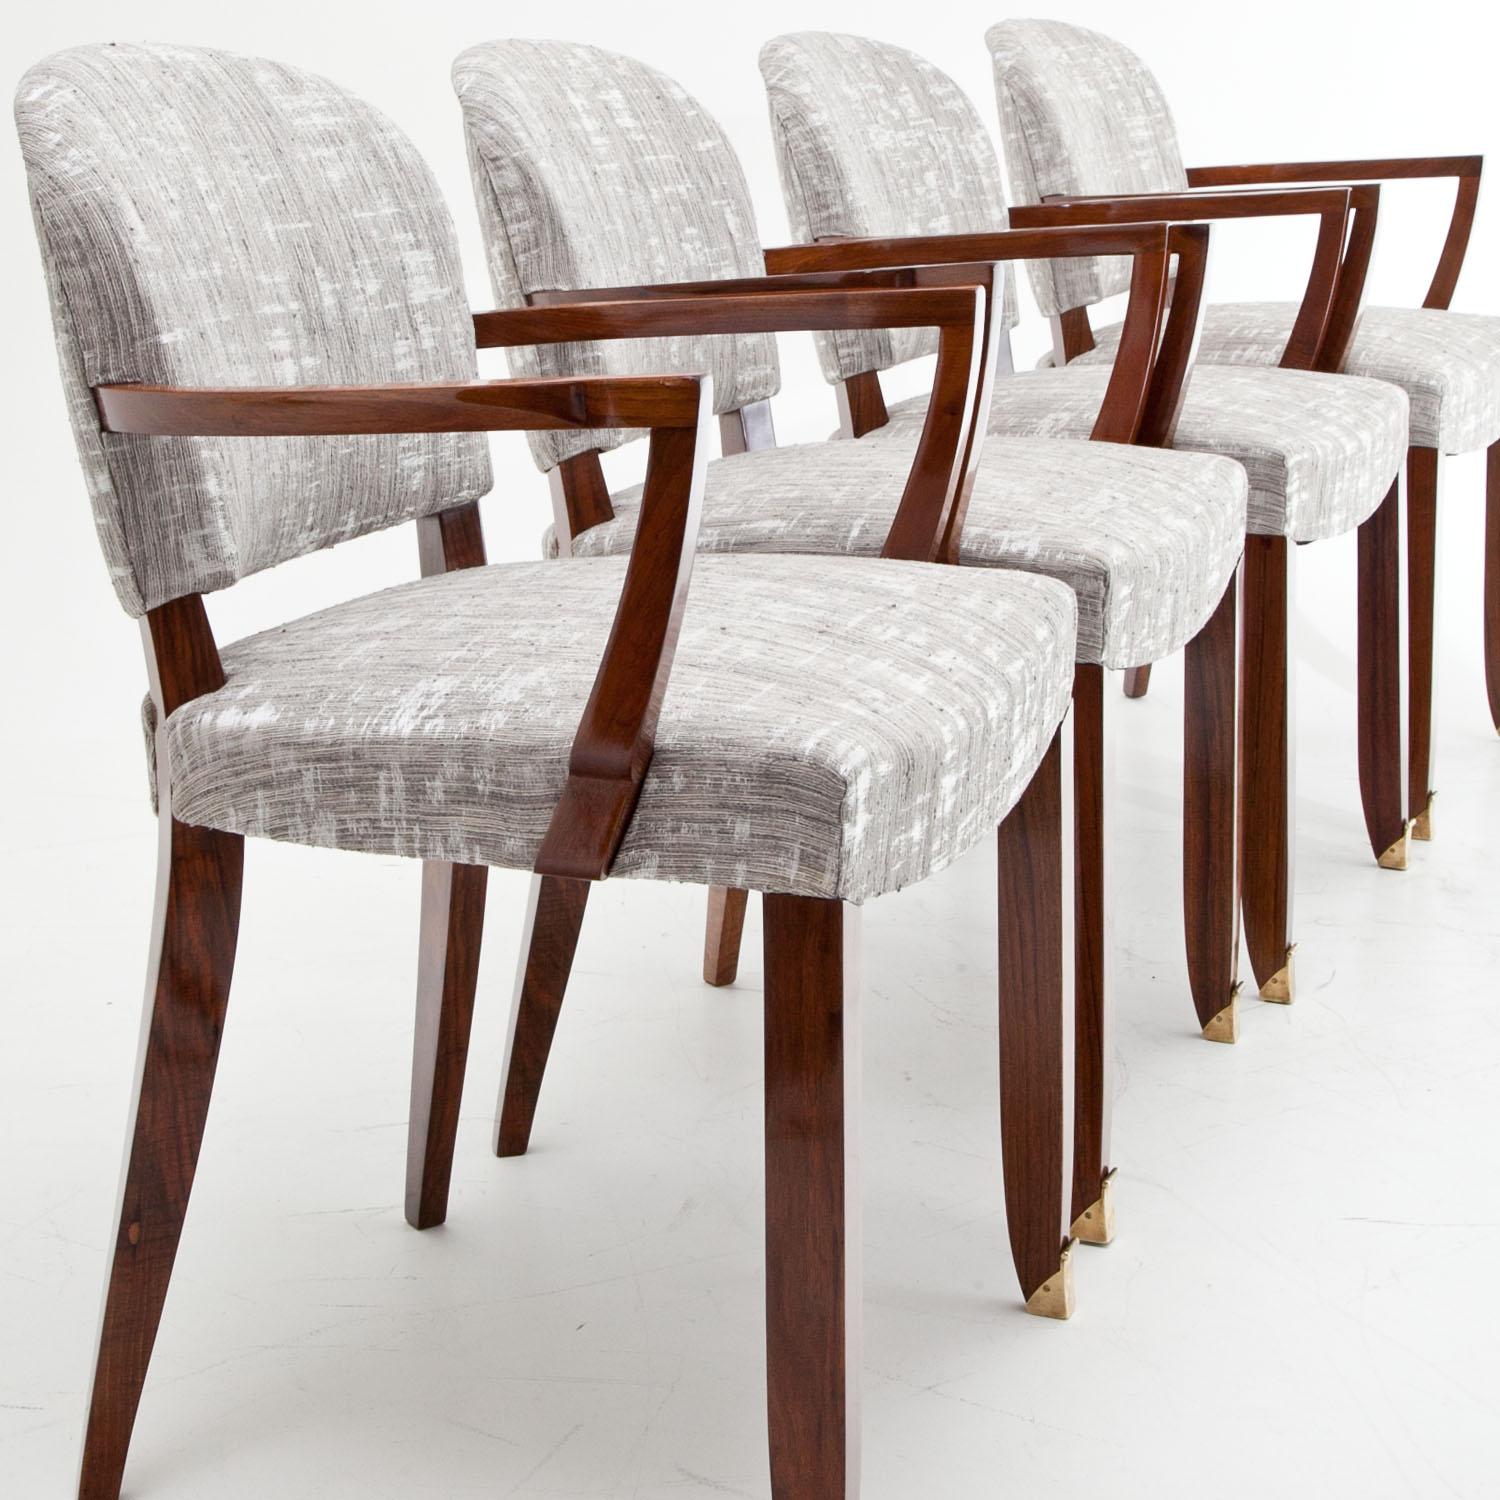 Six Art Deco armchairs by Jules Leleu on minimally curved front legs with brass sabots and slightly bent rear legs. The straight armrest rest on curved supports and the rounded backrests and seats were reupholstered with a high quality